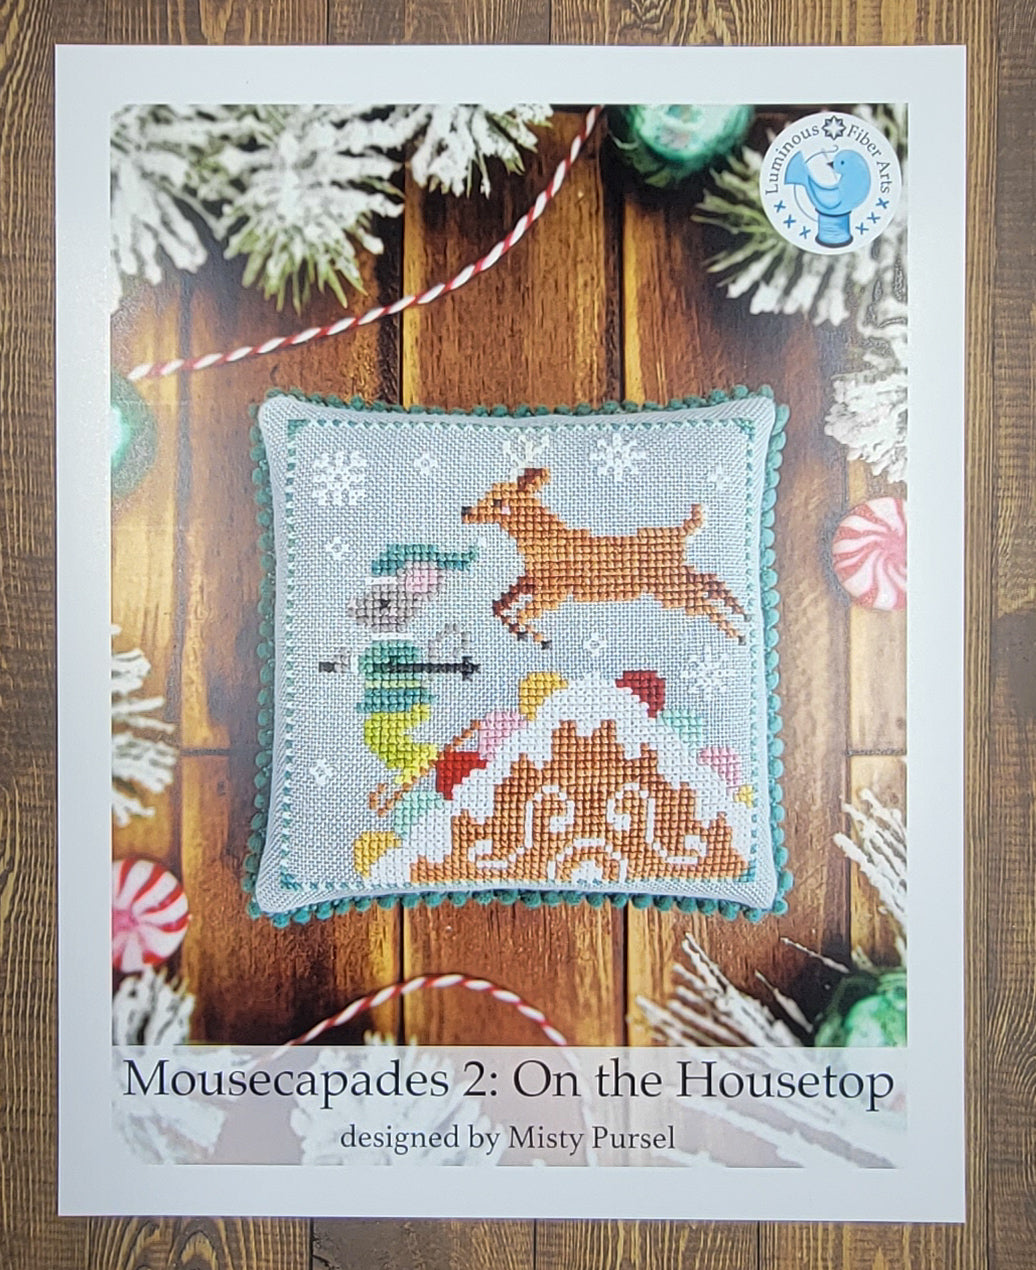 Mousecapades 2: On the Housetop